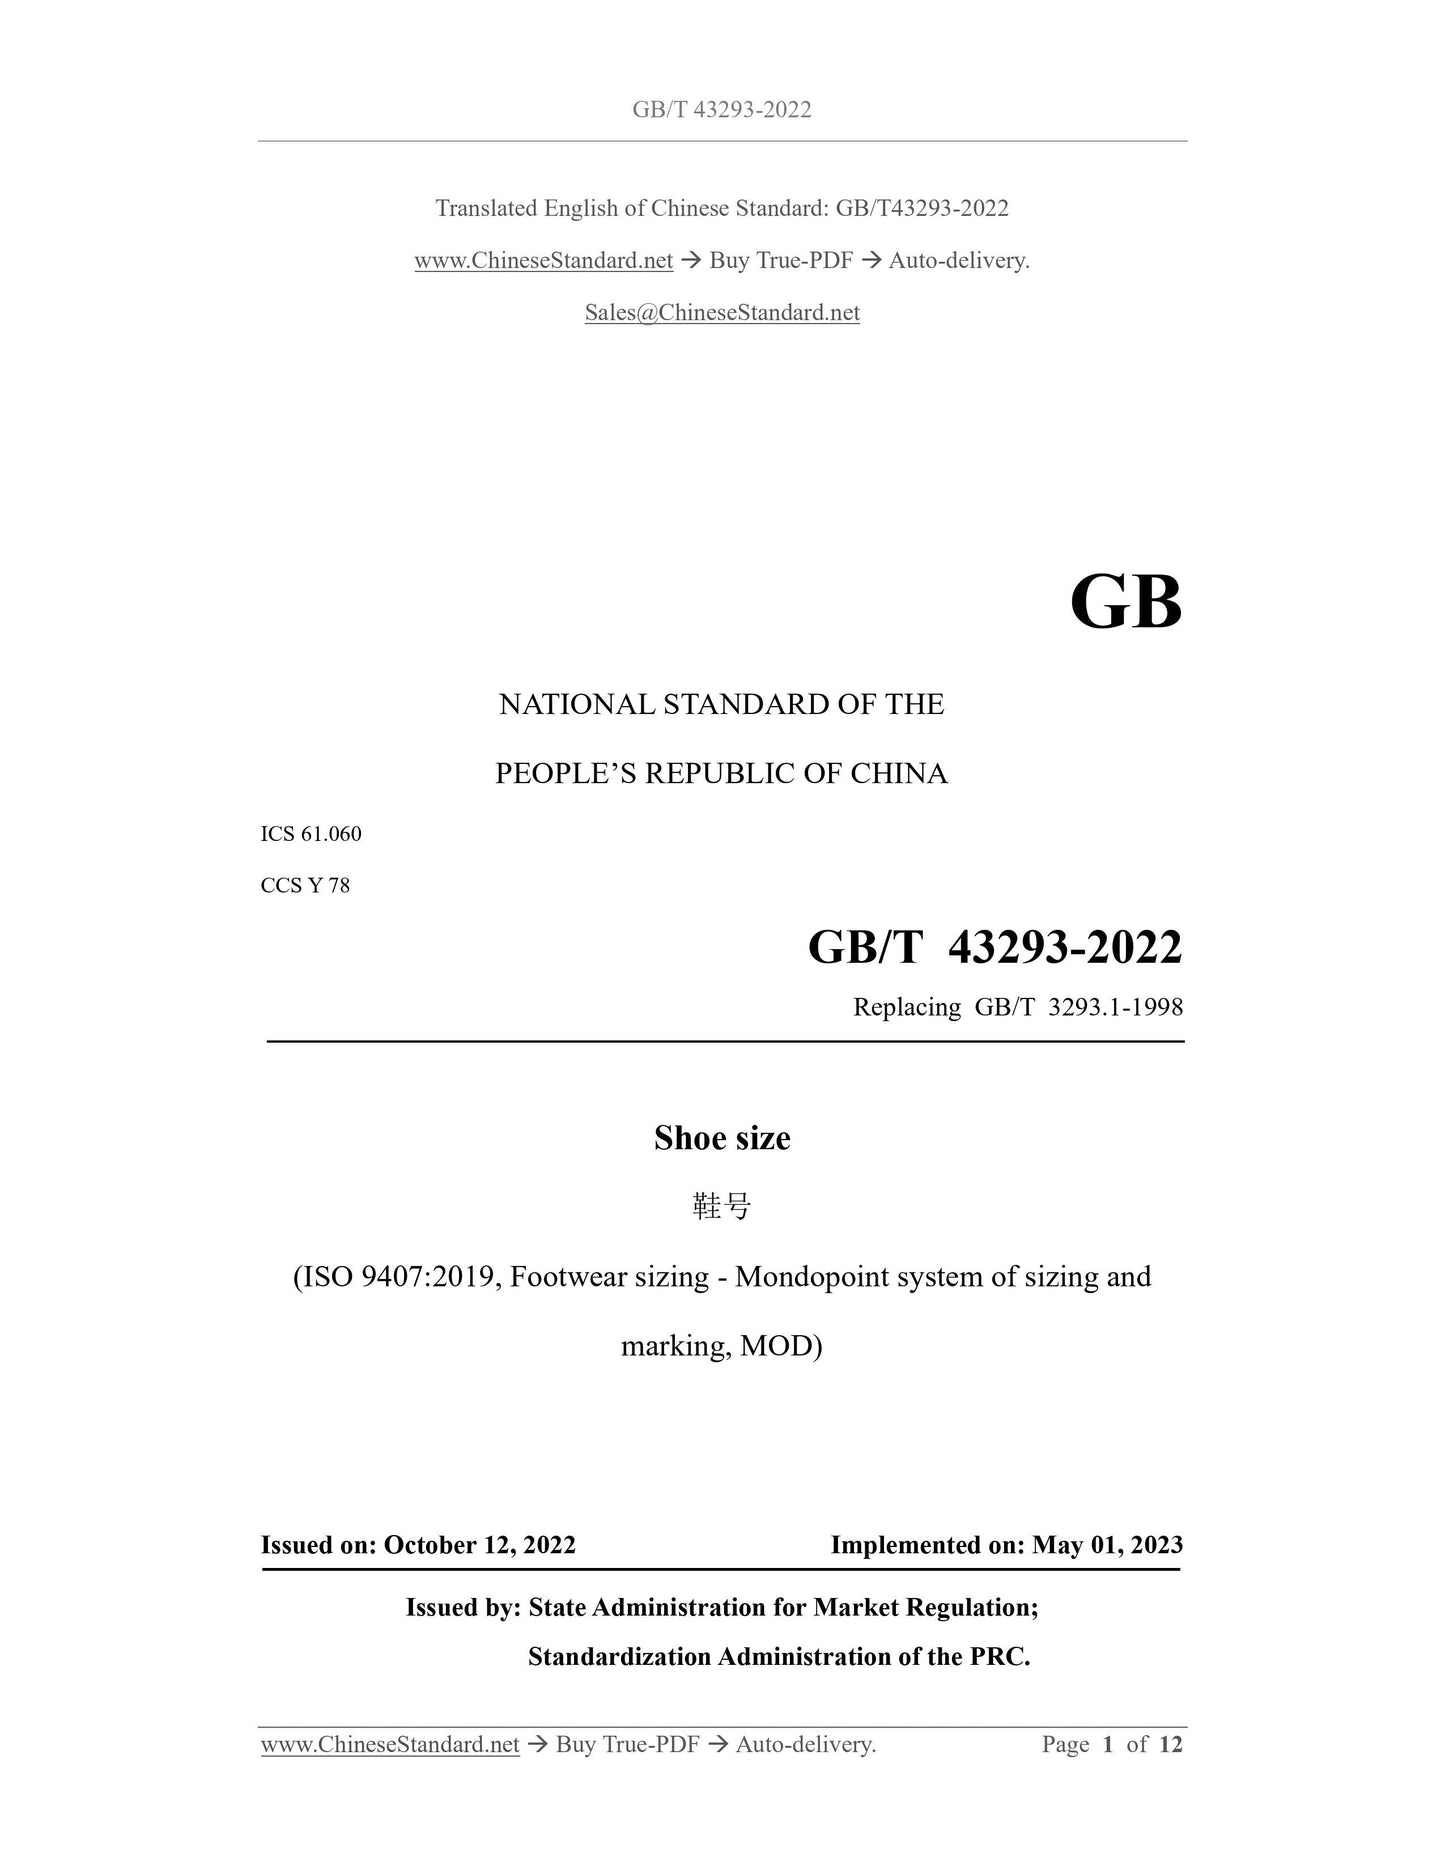 GB/T 43293-2022 Page 1